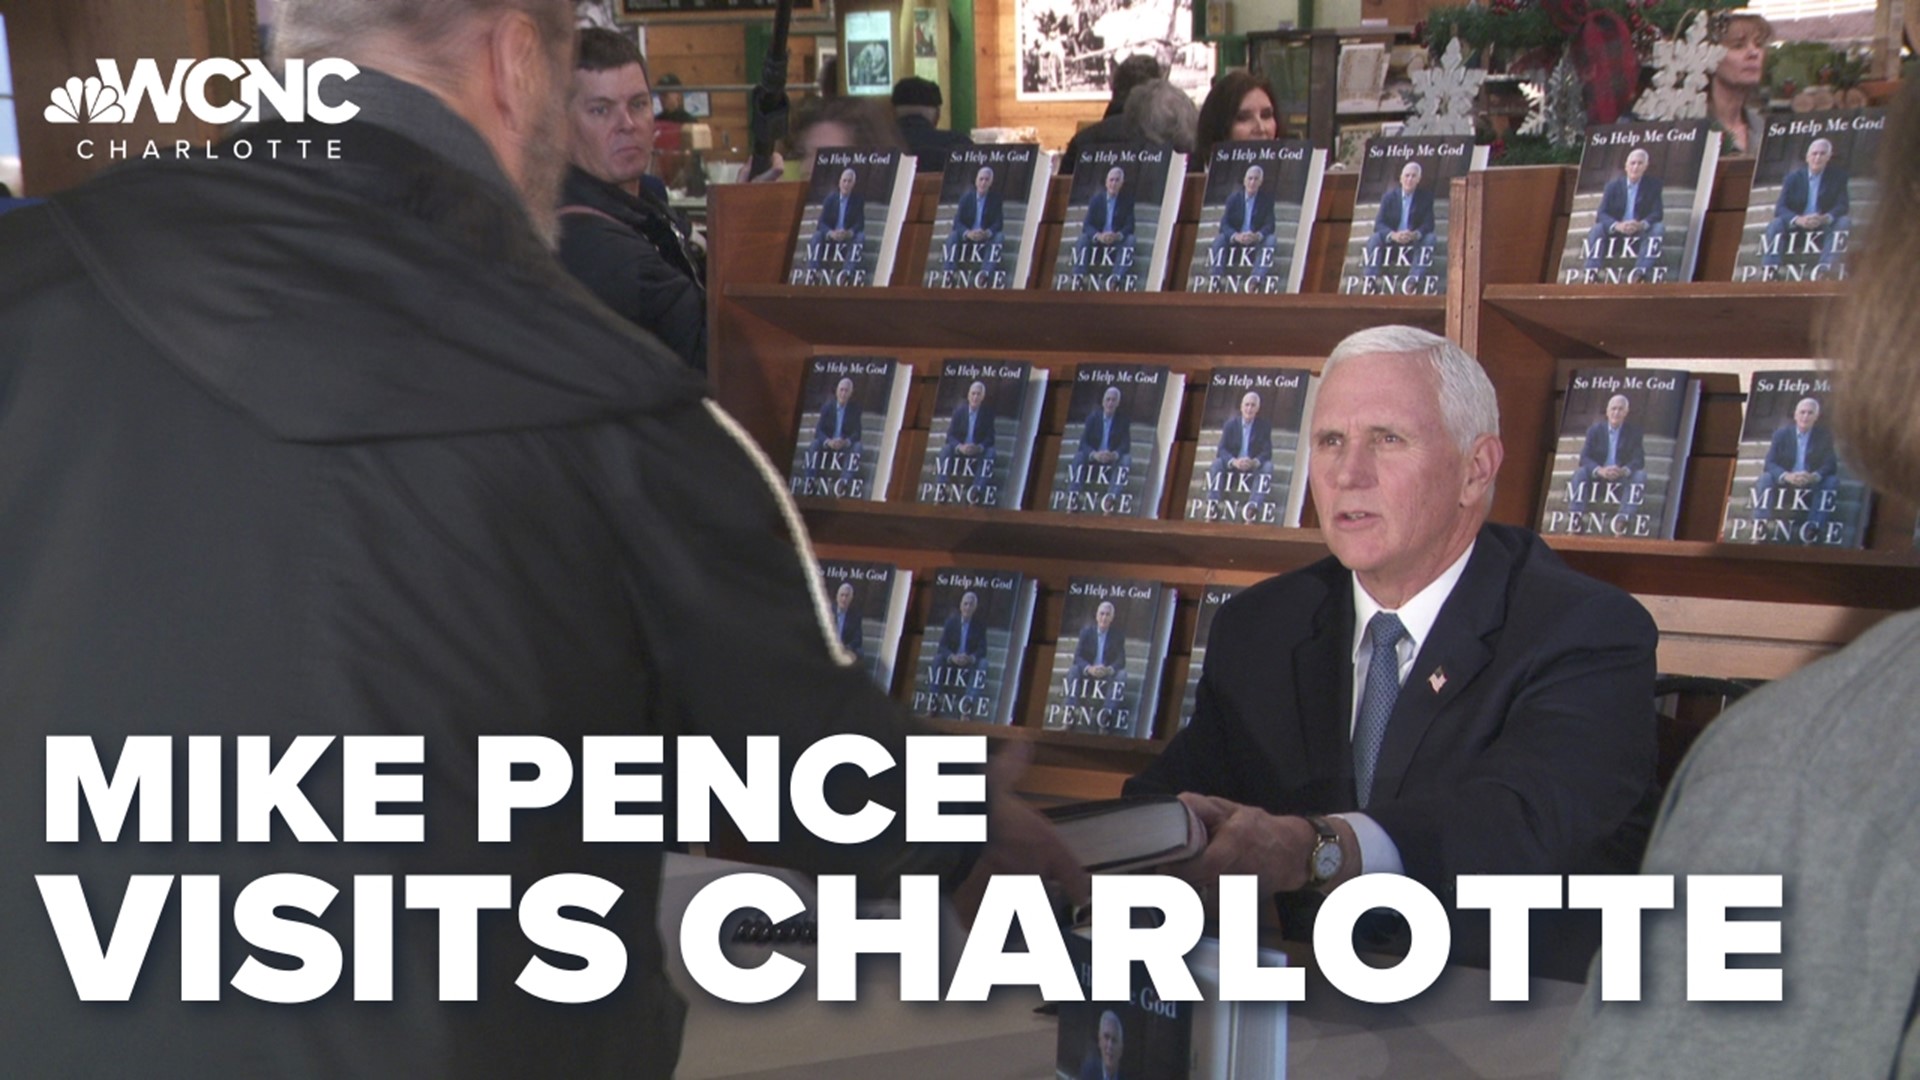 Pence signed copies of his new autobiography "So Help Me God."